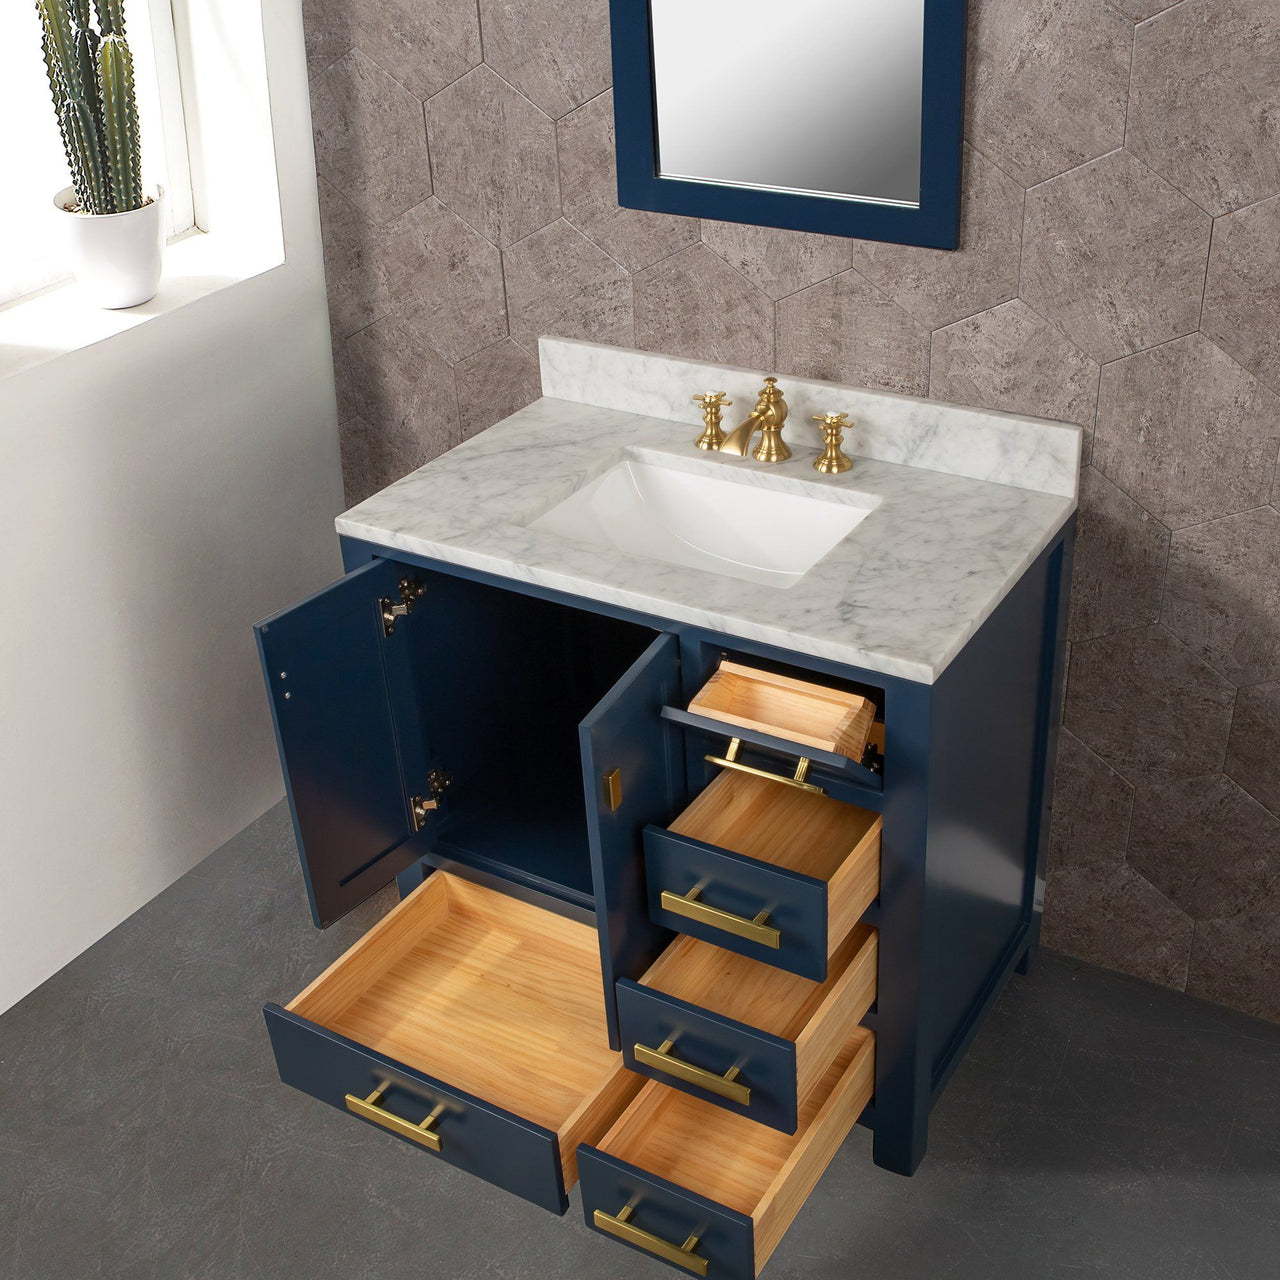 Madison 36-Inch Single Sink Carrara White Marble Vanity In Monarch Blue With Matching Mirror and F2-0012-06-TL Lavatory Faucet Vanity Water Creation 